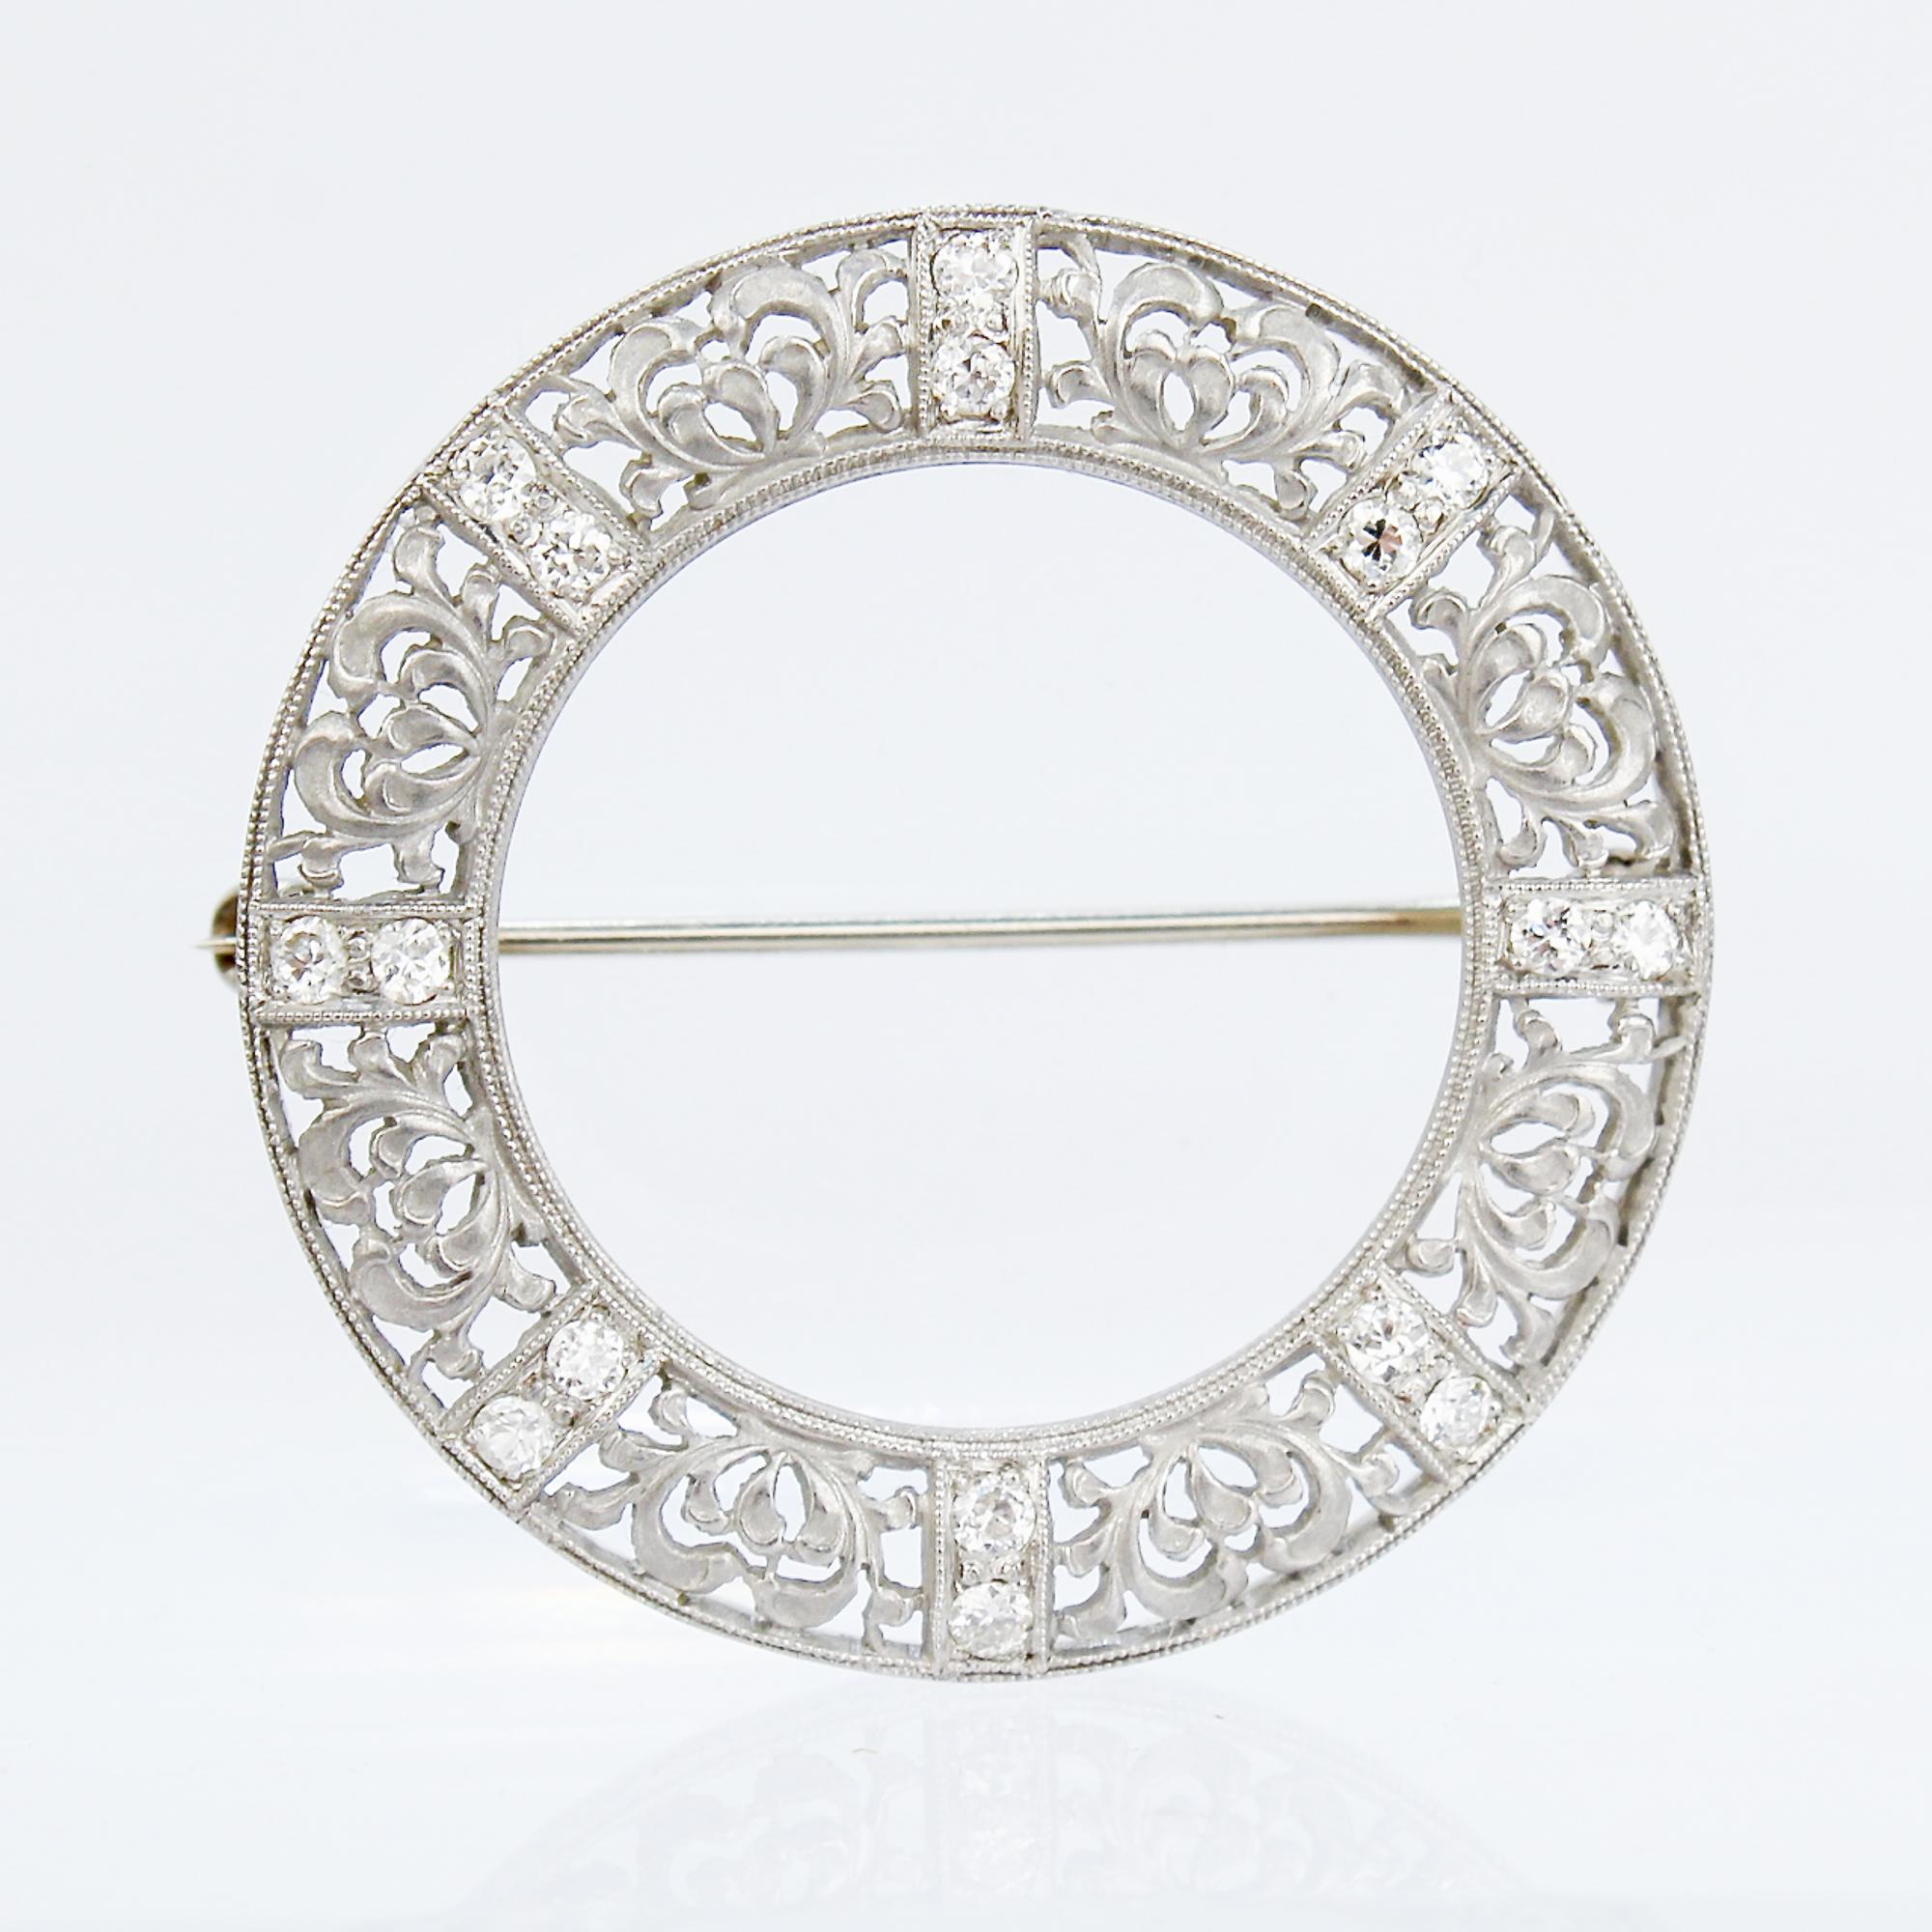 A fine Art Deco white gold & diamond round filigree brooch or pin.

In 14k white gold.

The gold is filigreed into rocaille devices and set with 16 round cut diamonds set in pairs in the cardinal and ordinal directions.

With a pin and safety clasp